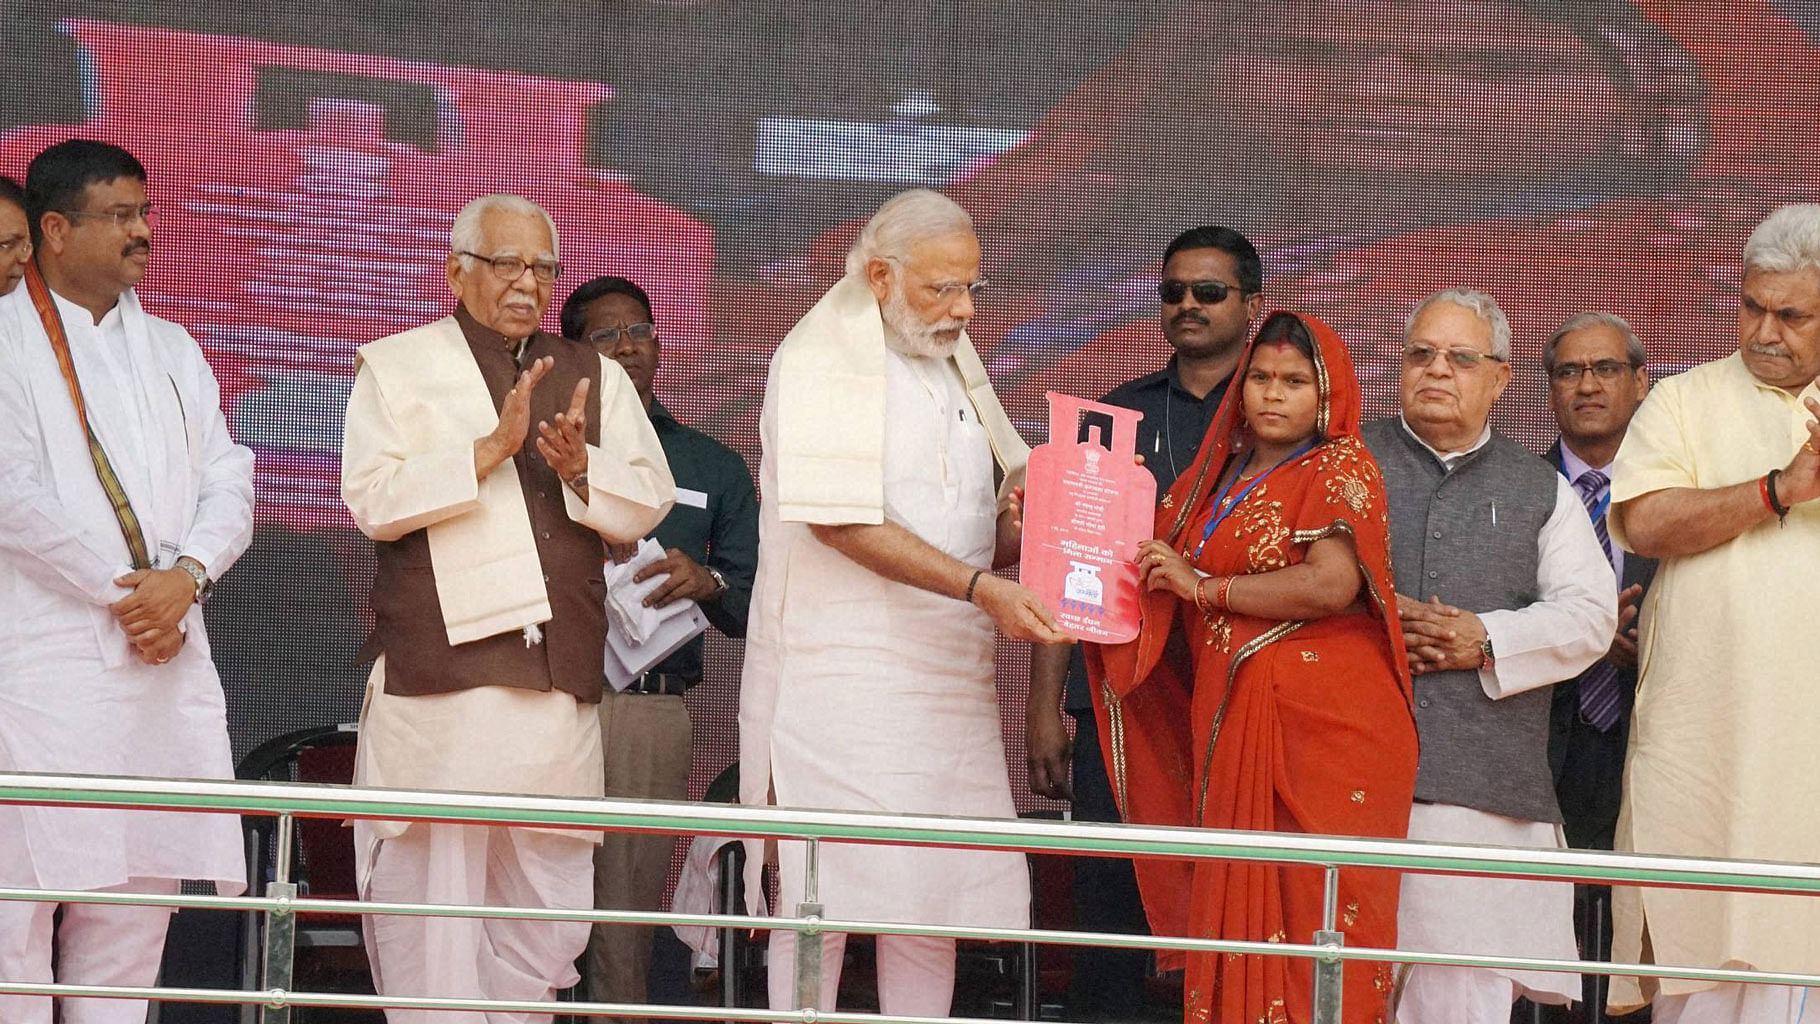 Prime Minister Narendra Modi presents cooking gas connection to a woman of a Below Poverty Line (BPL) family during the launch of the Pradhan Mantri Ujjwala Yojana in Ballia. (Photo: PTI)